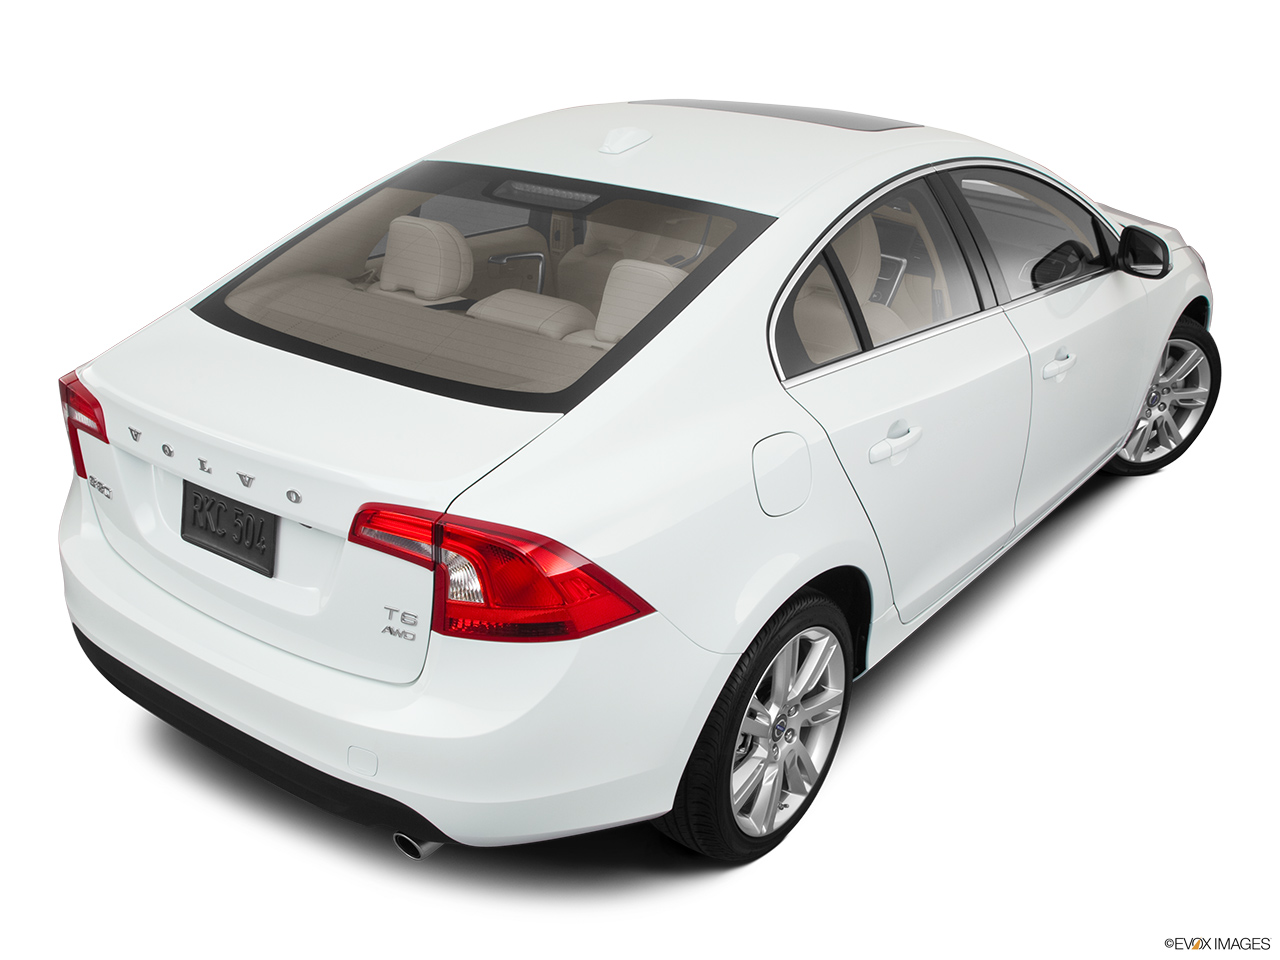 2011 Volvo S60 T6 A Rear 3/4 angle view. 